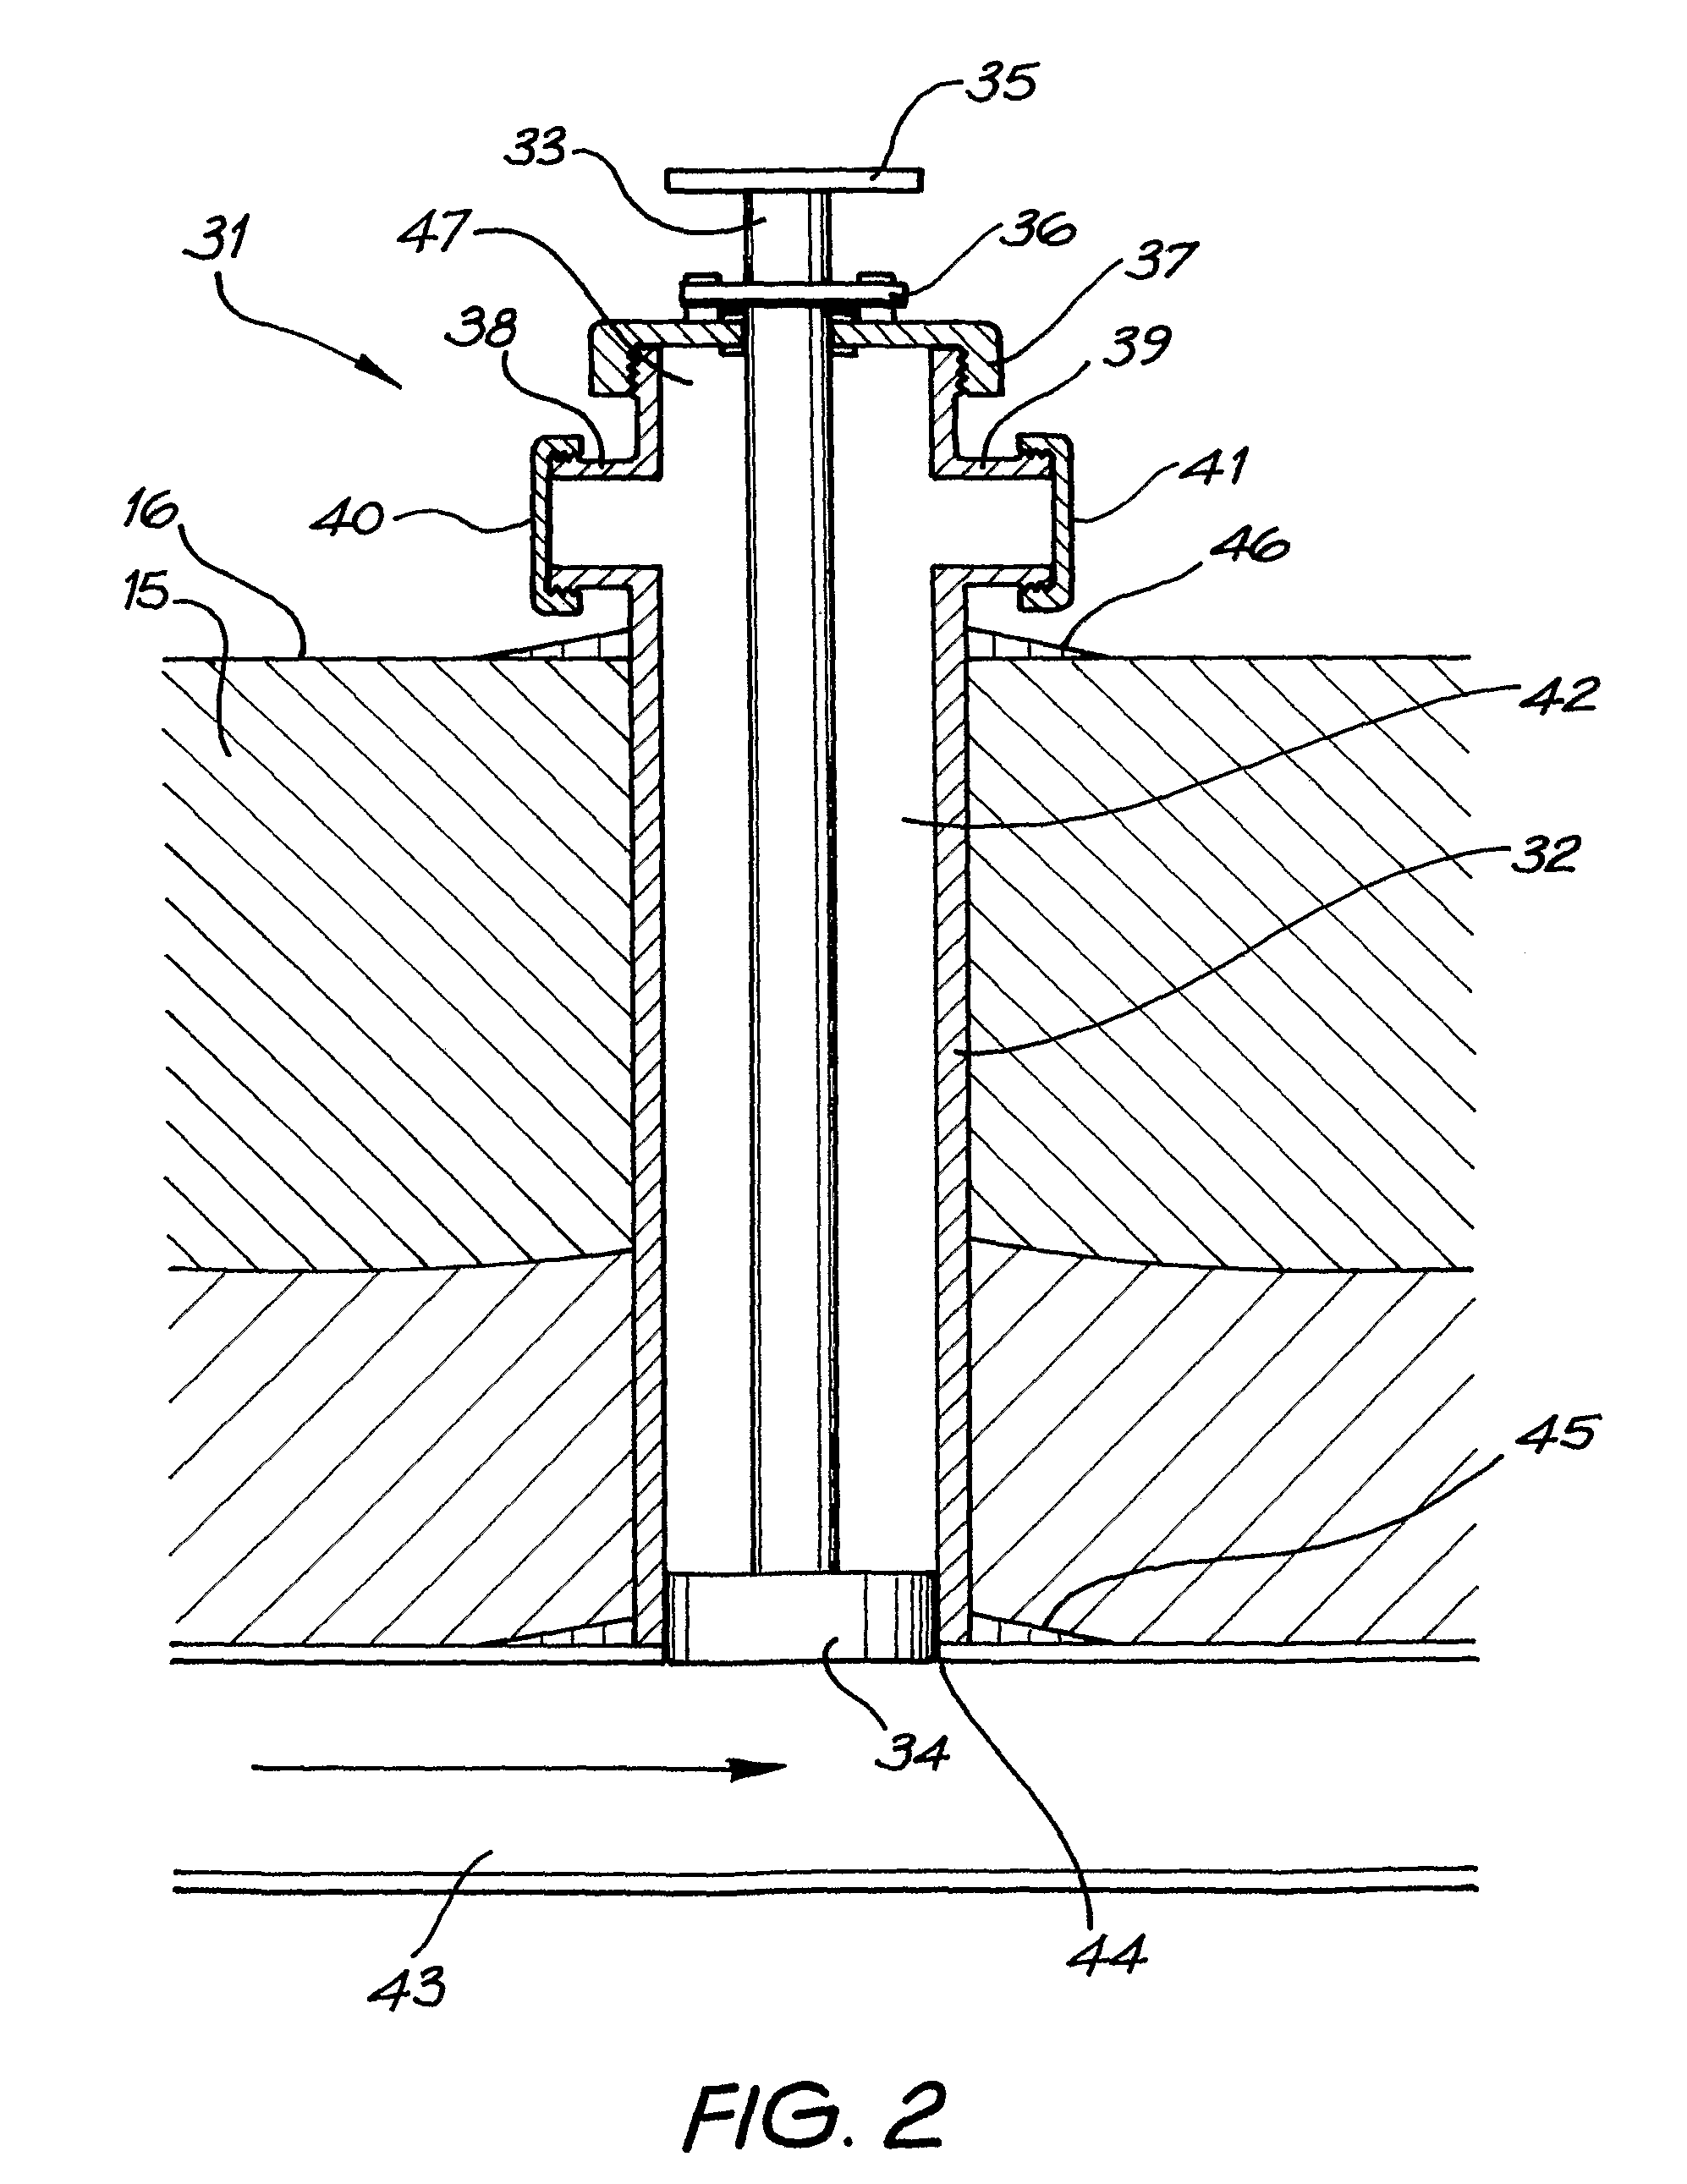 Peripheral access devices and systems